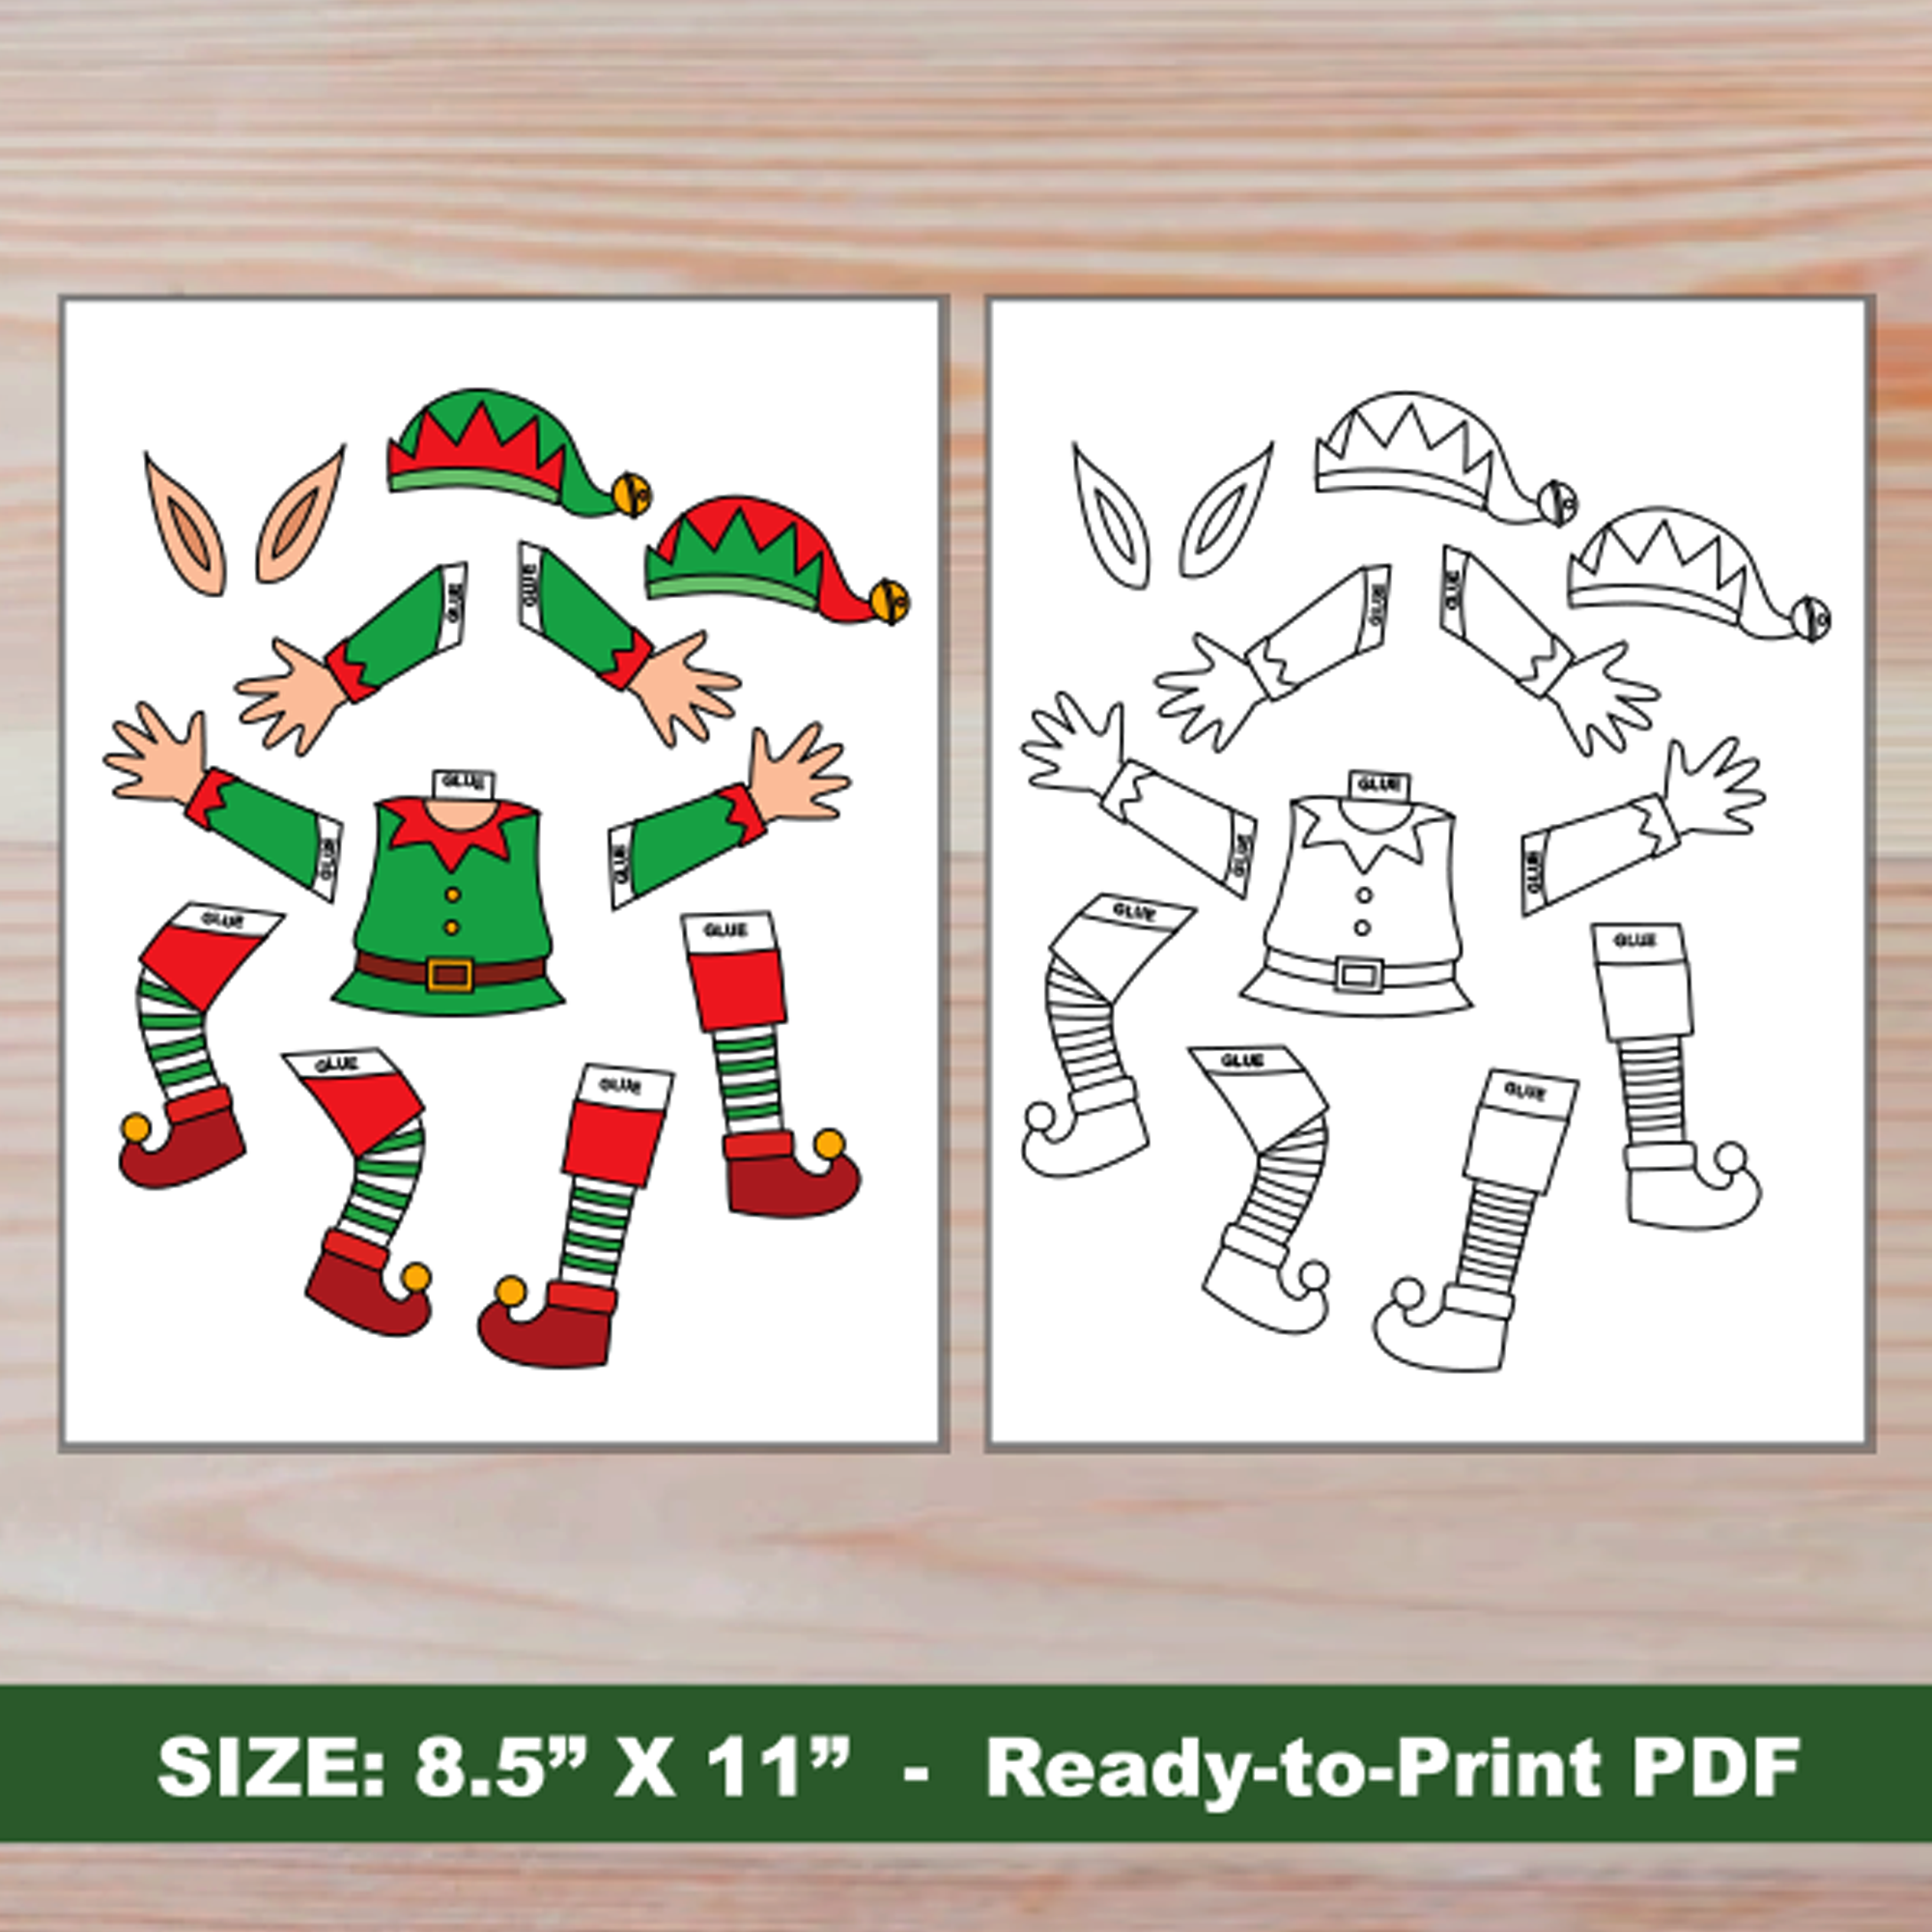 Elf Yourself! Use This Free Printable And Your Picture To Create A